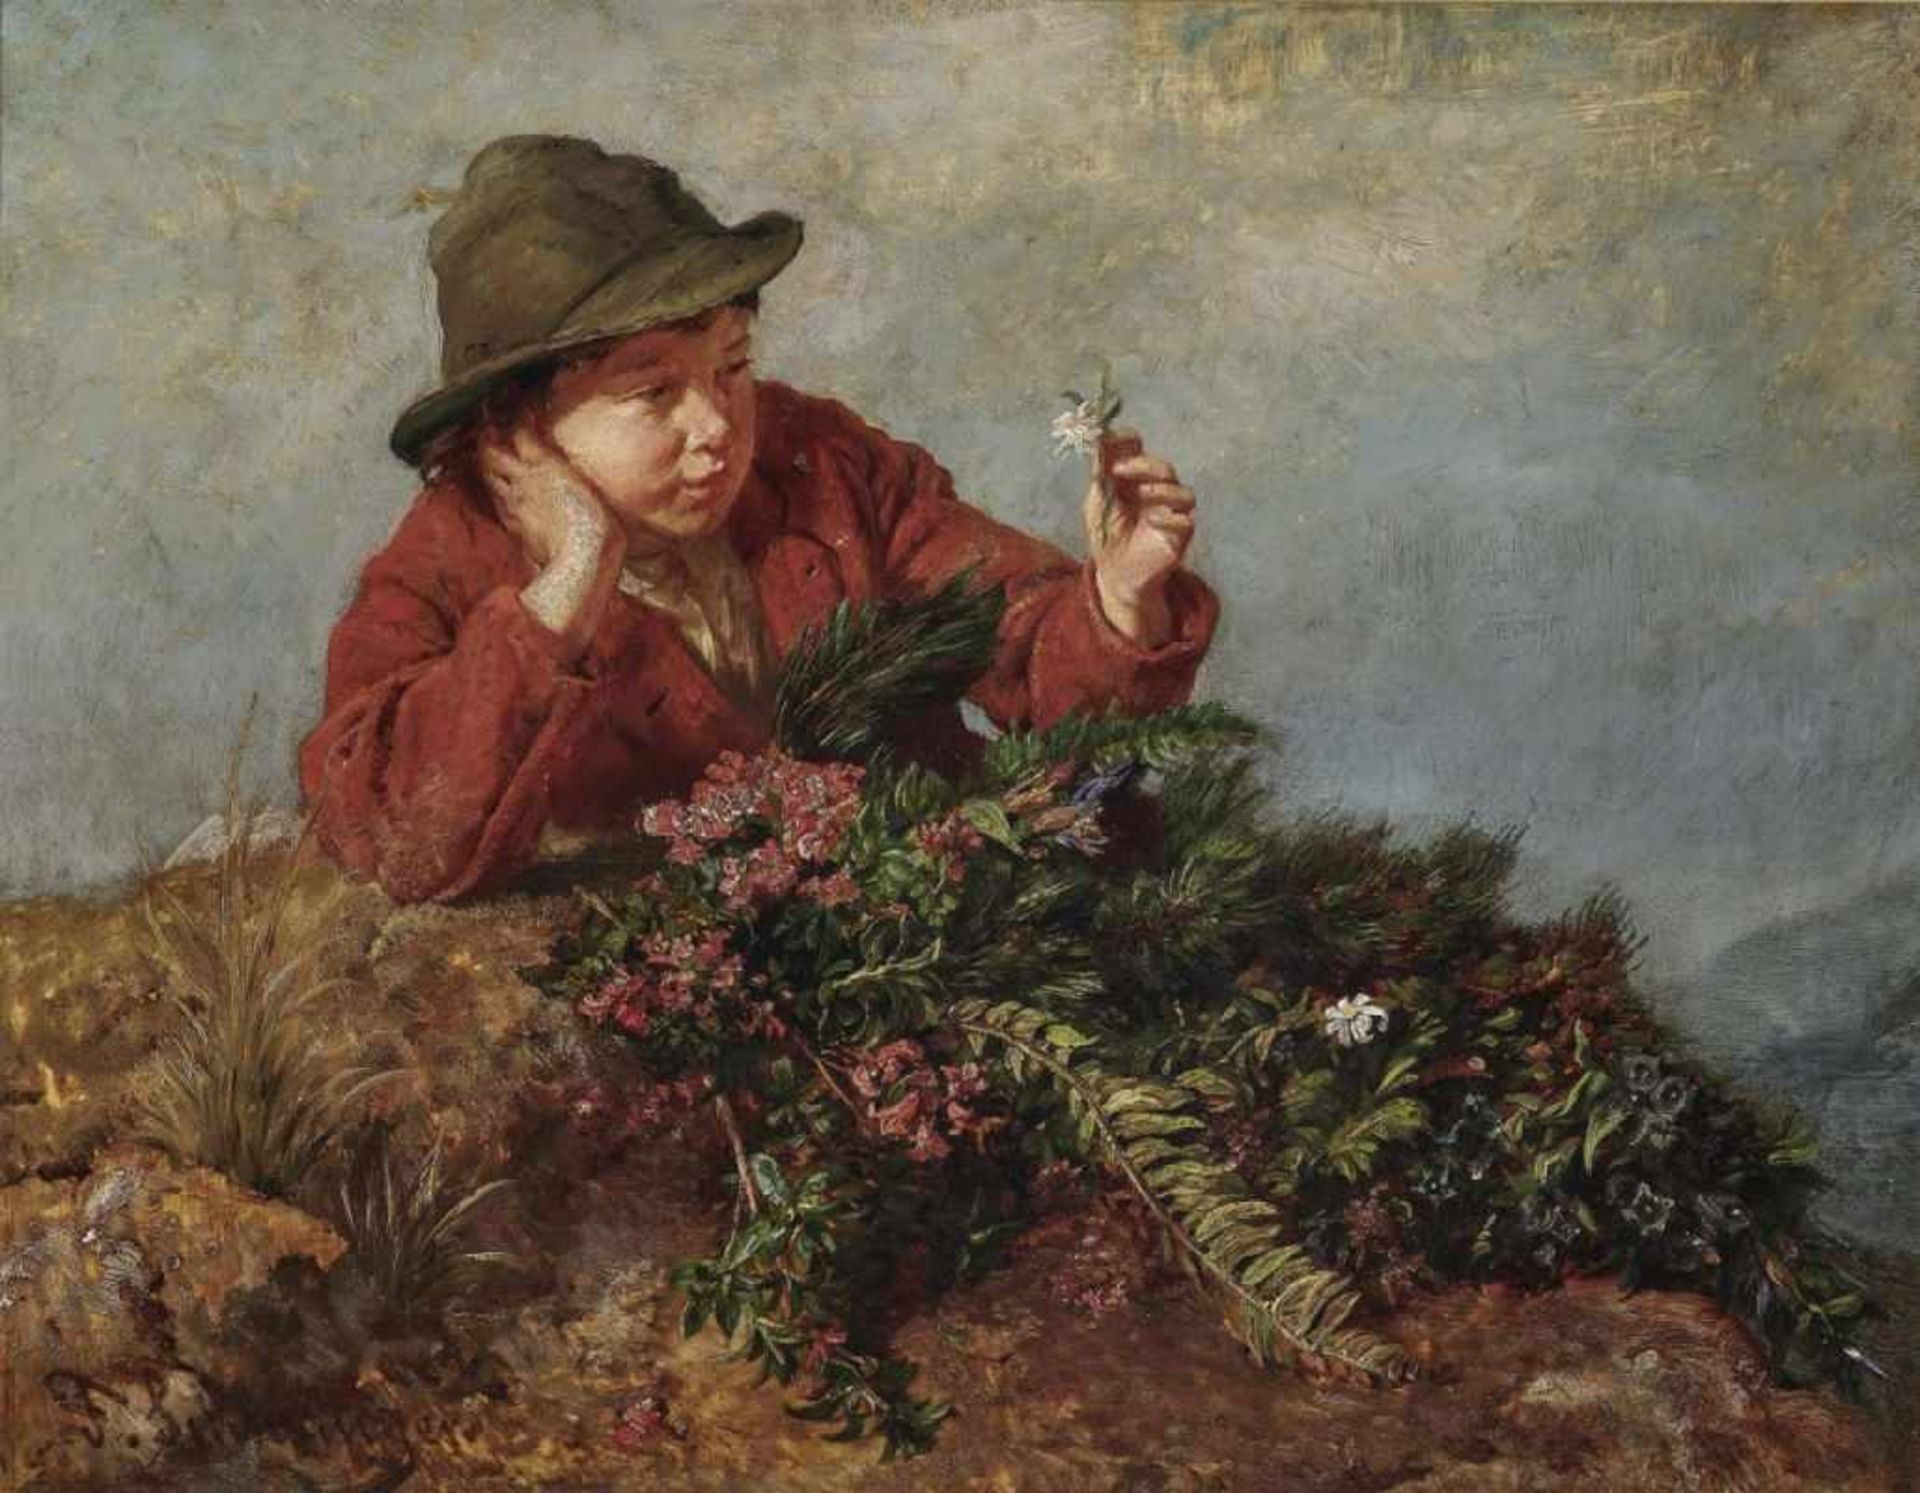 Schlesinger, FelixA Boy with Wild Herbs Signed lower left. Oil on panel. 39 x 49.5 cm. With free-